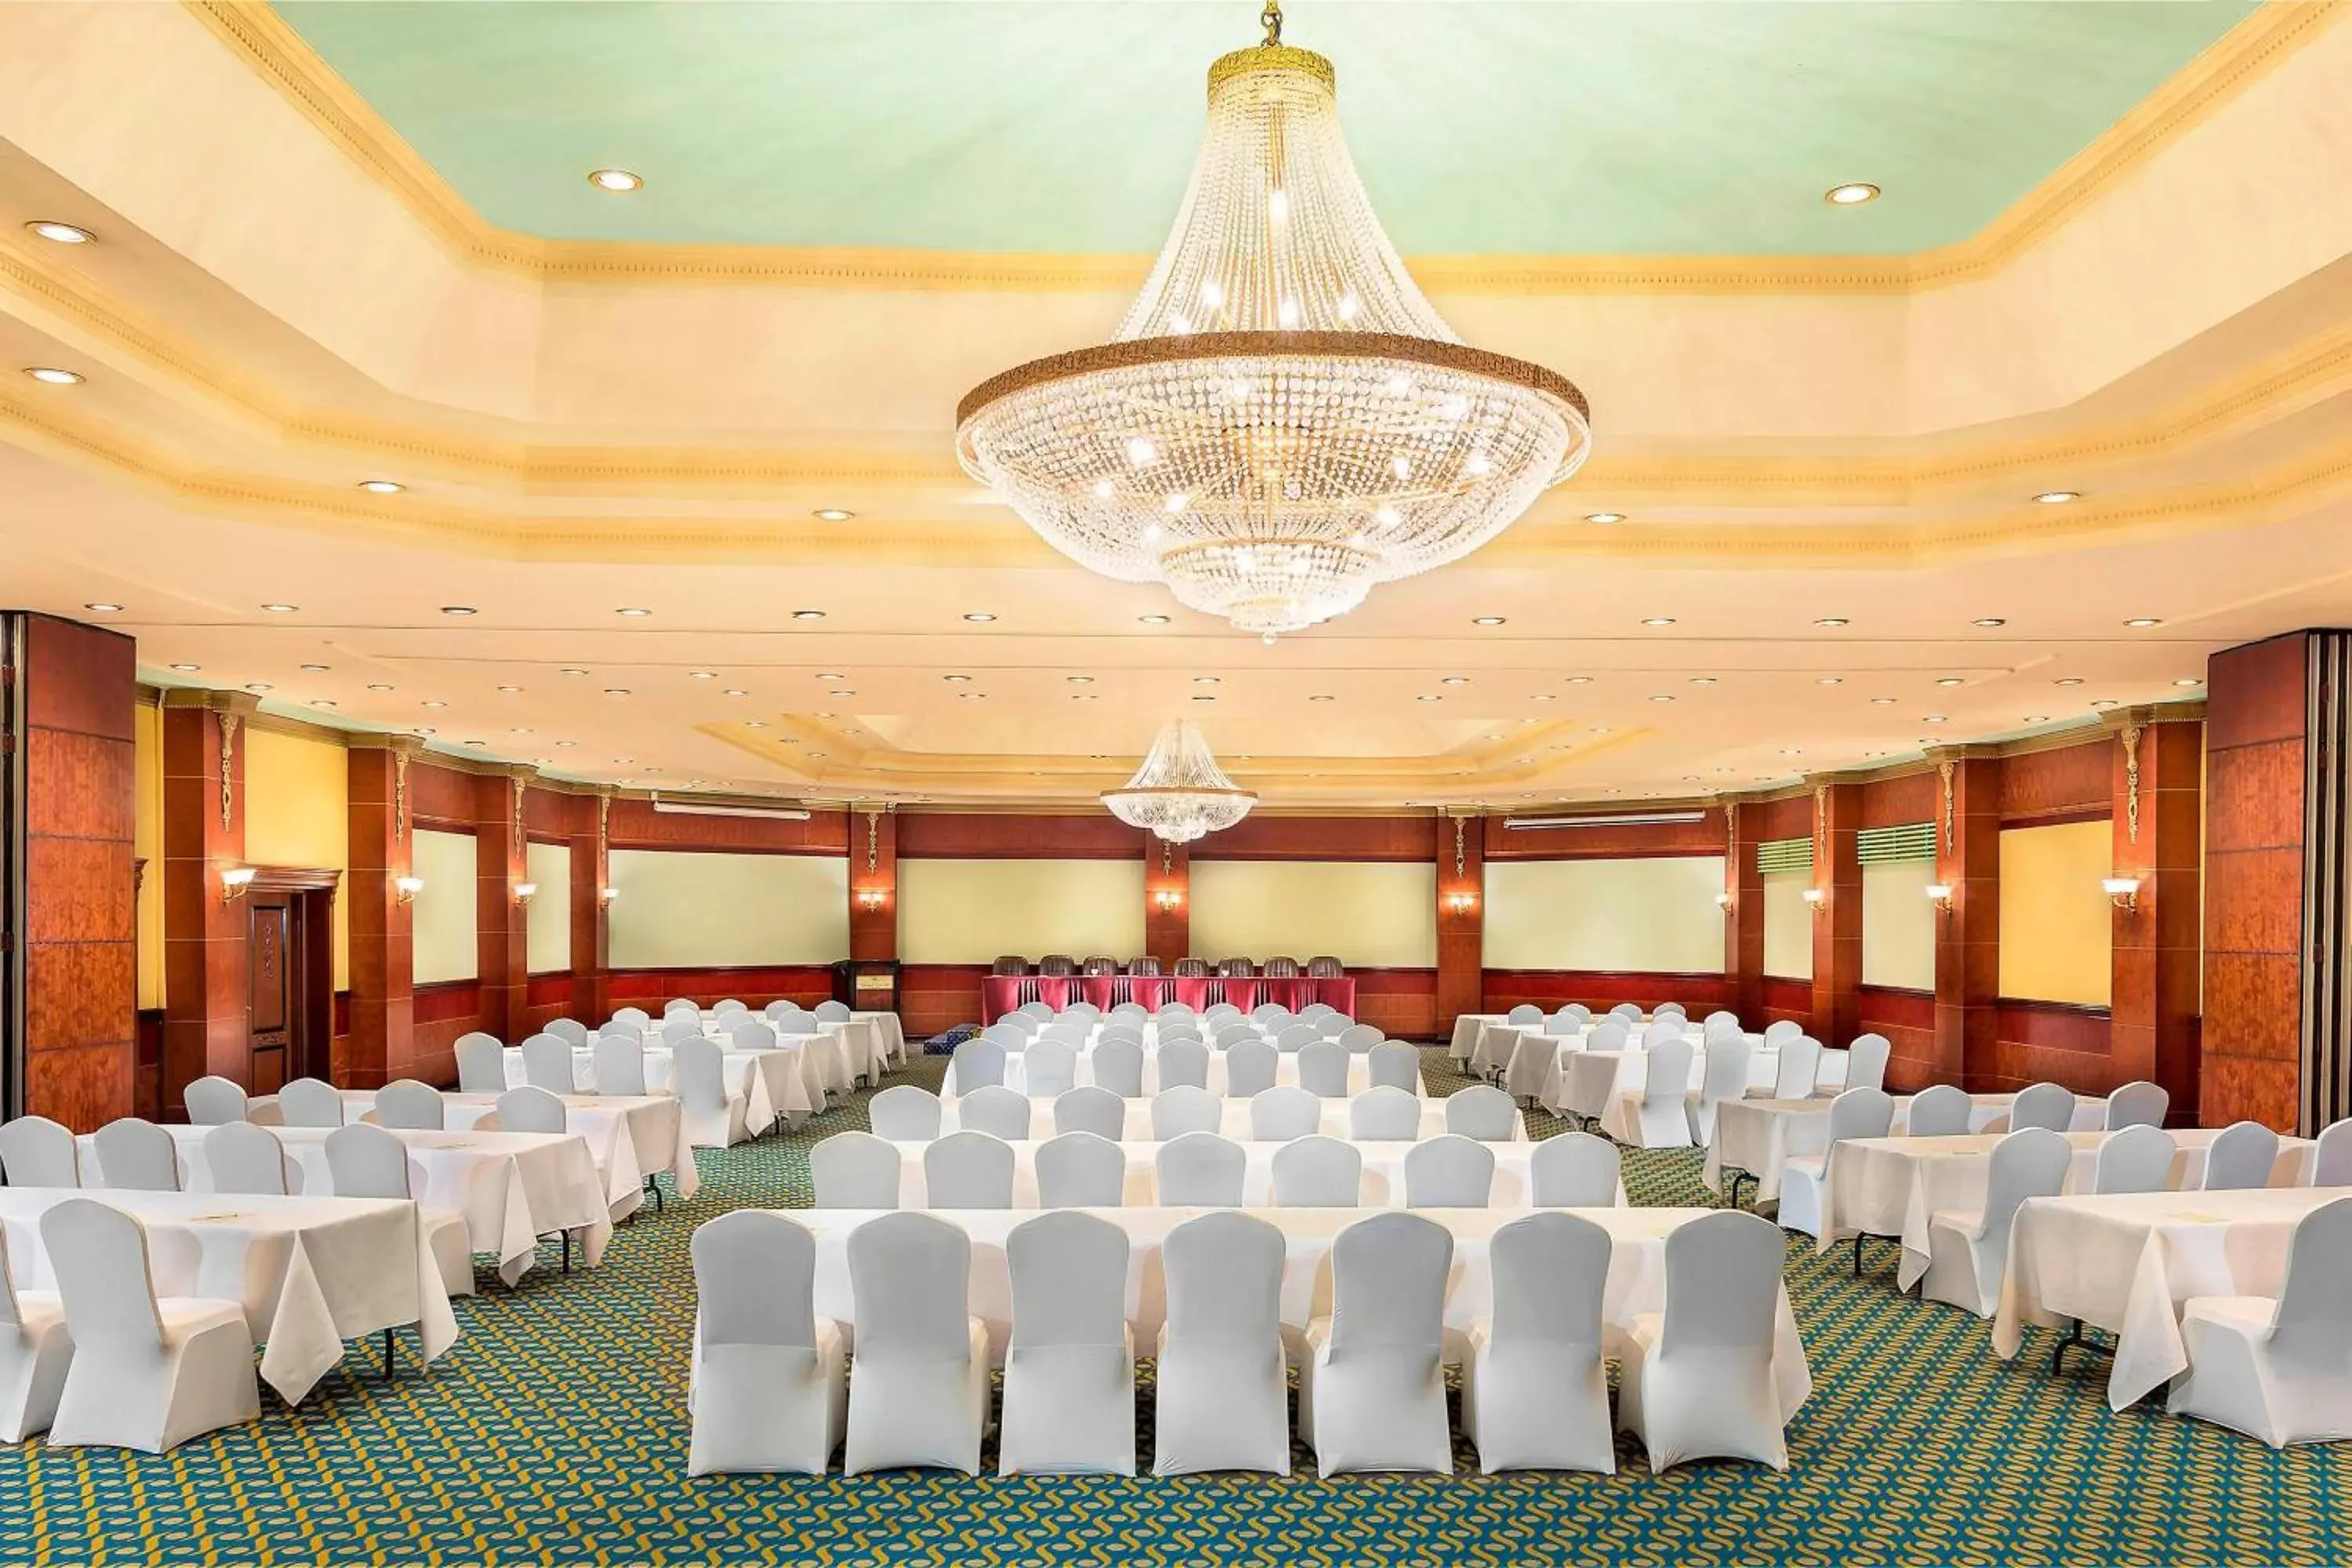 Meeting/conference room, Banquet Facilities in Sheraton Montazah Hotel